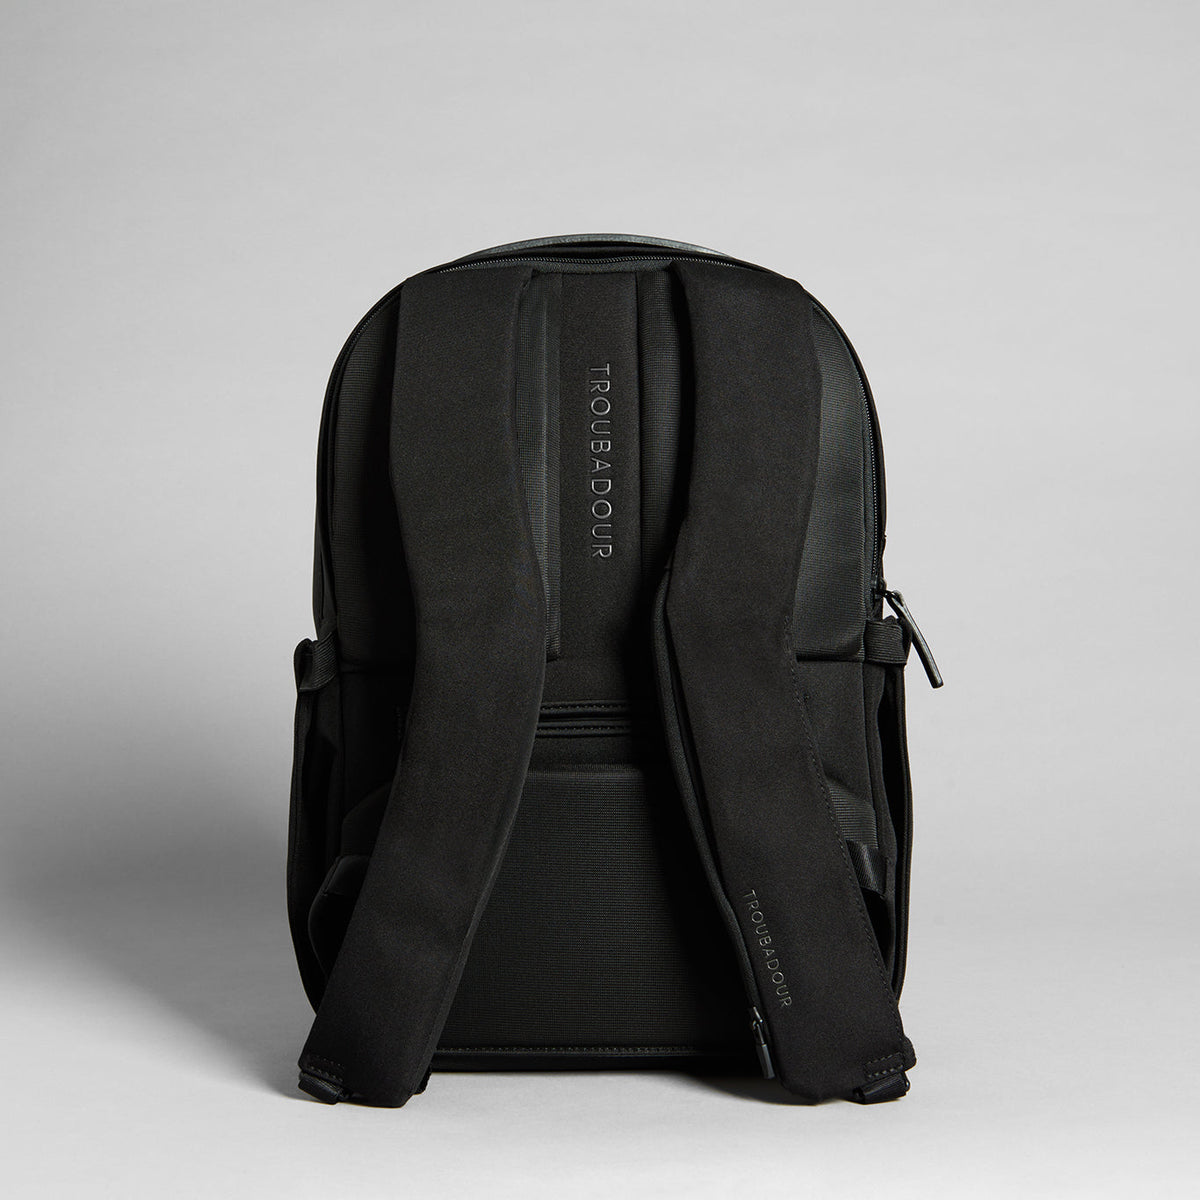 Troubadour Apex Compact Backpack 3.0 – The Shop at Equinox